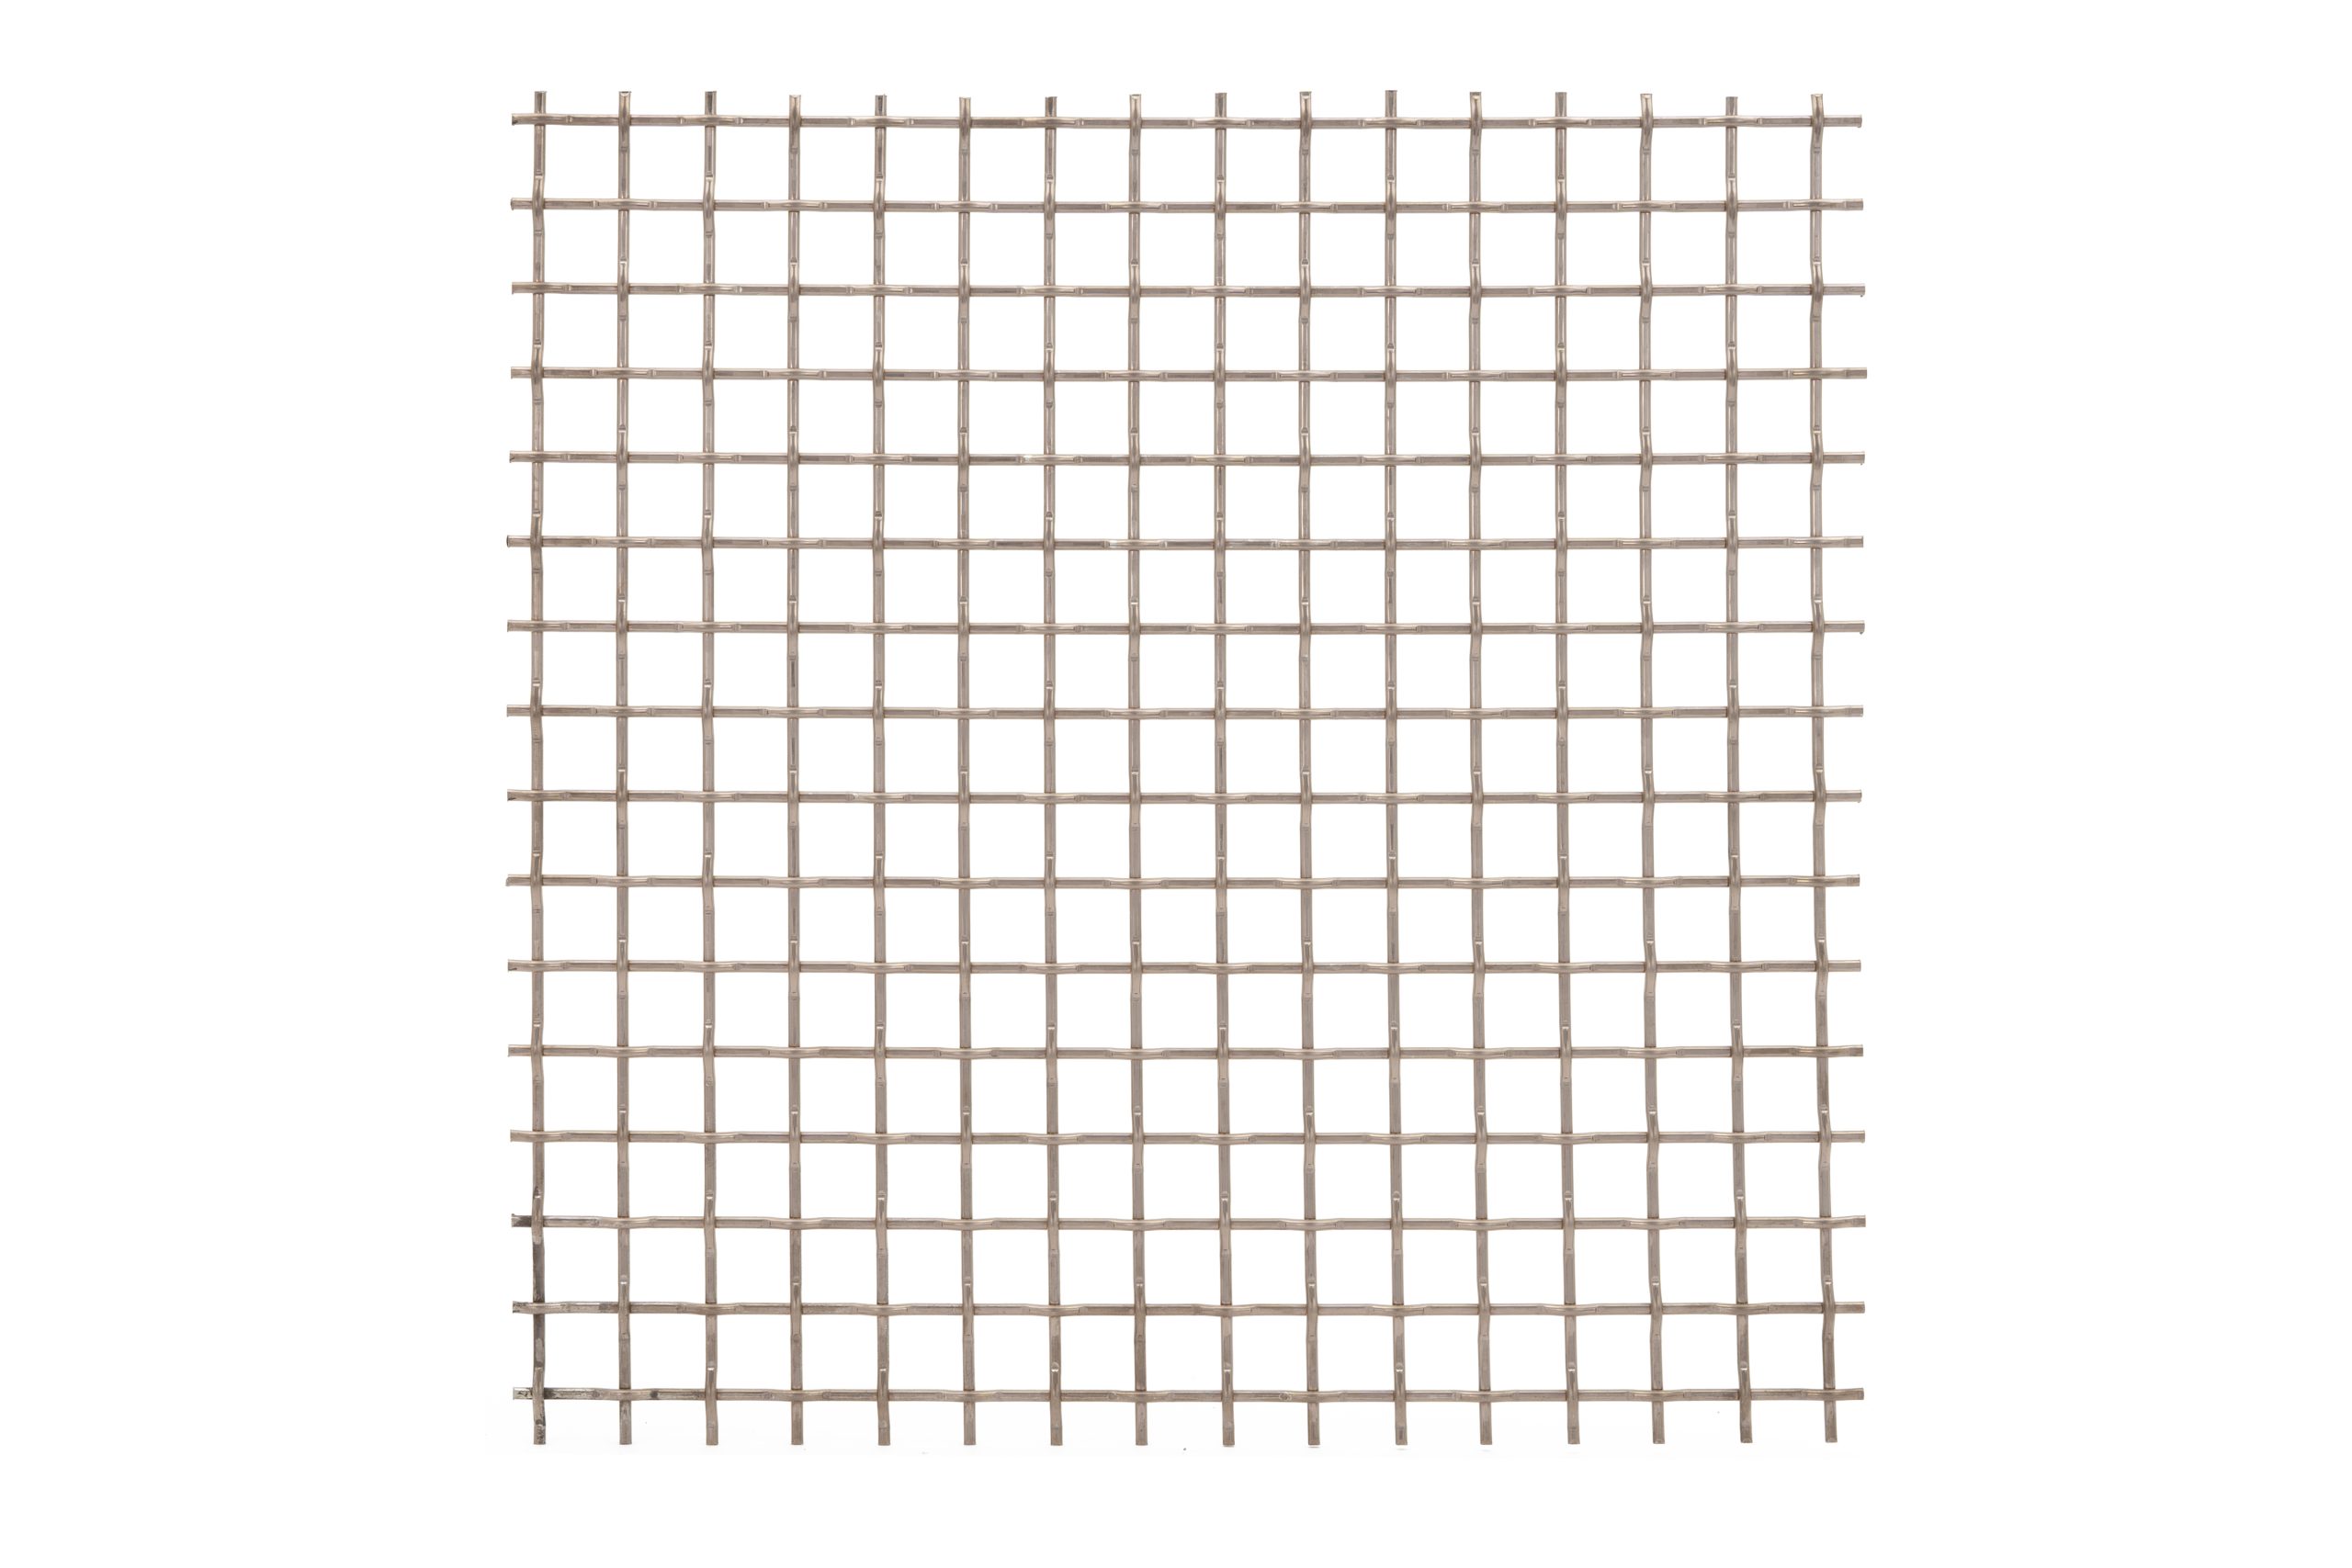 Brass Woven Wire Mesh: From 50 x 50 Mesh to 100 x 100 Mesh On Edward J.  Darby & Son, Inc.